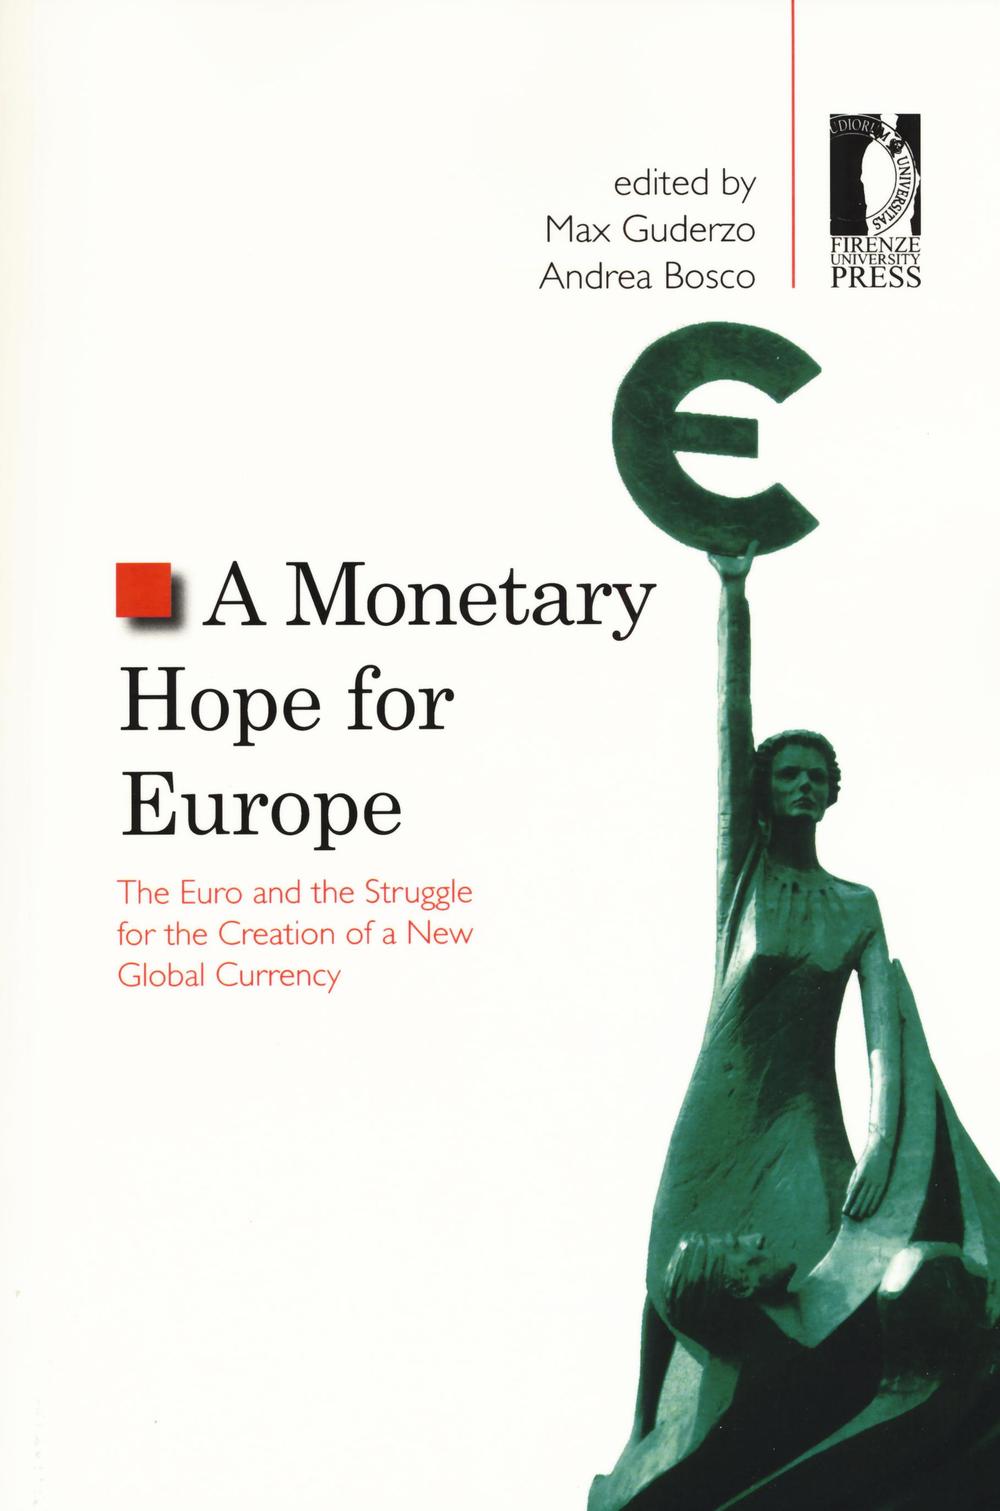 A Monetary hope for Europe. The Euro and the struggle for the creation of a new global currency